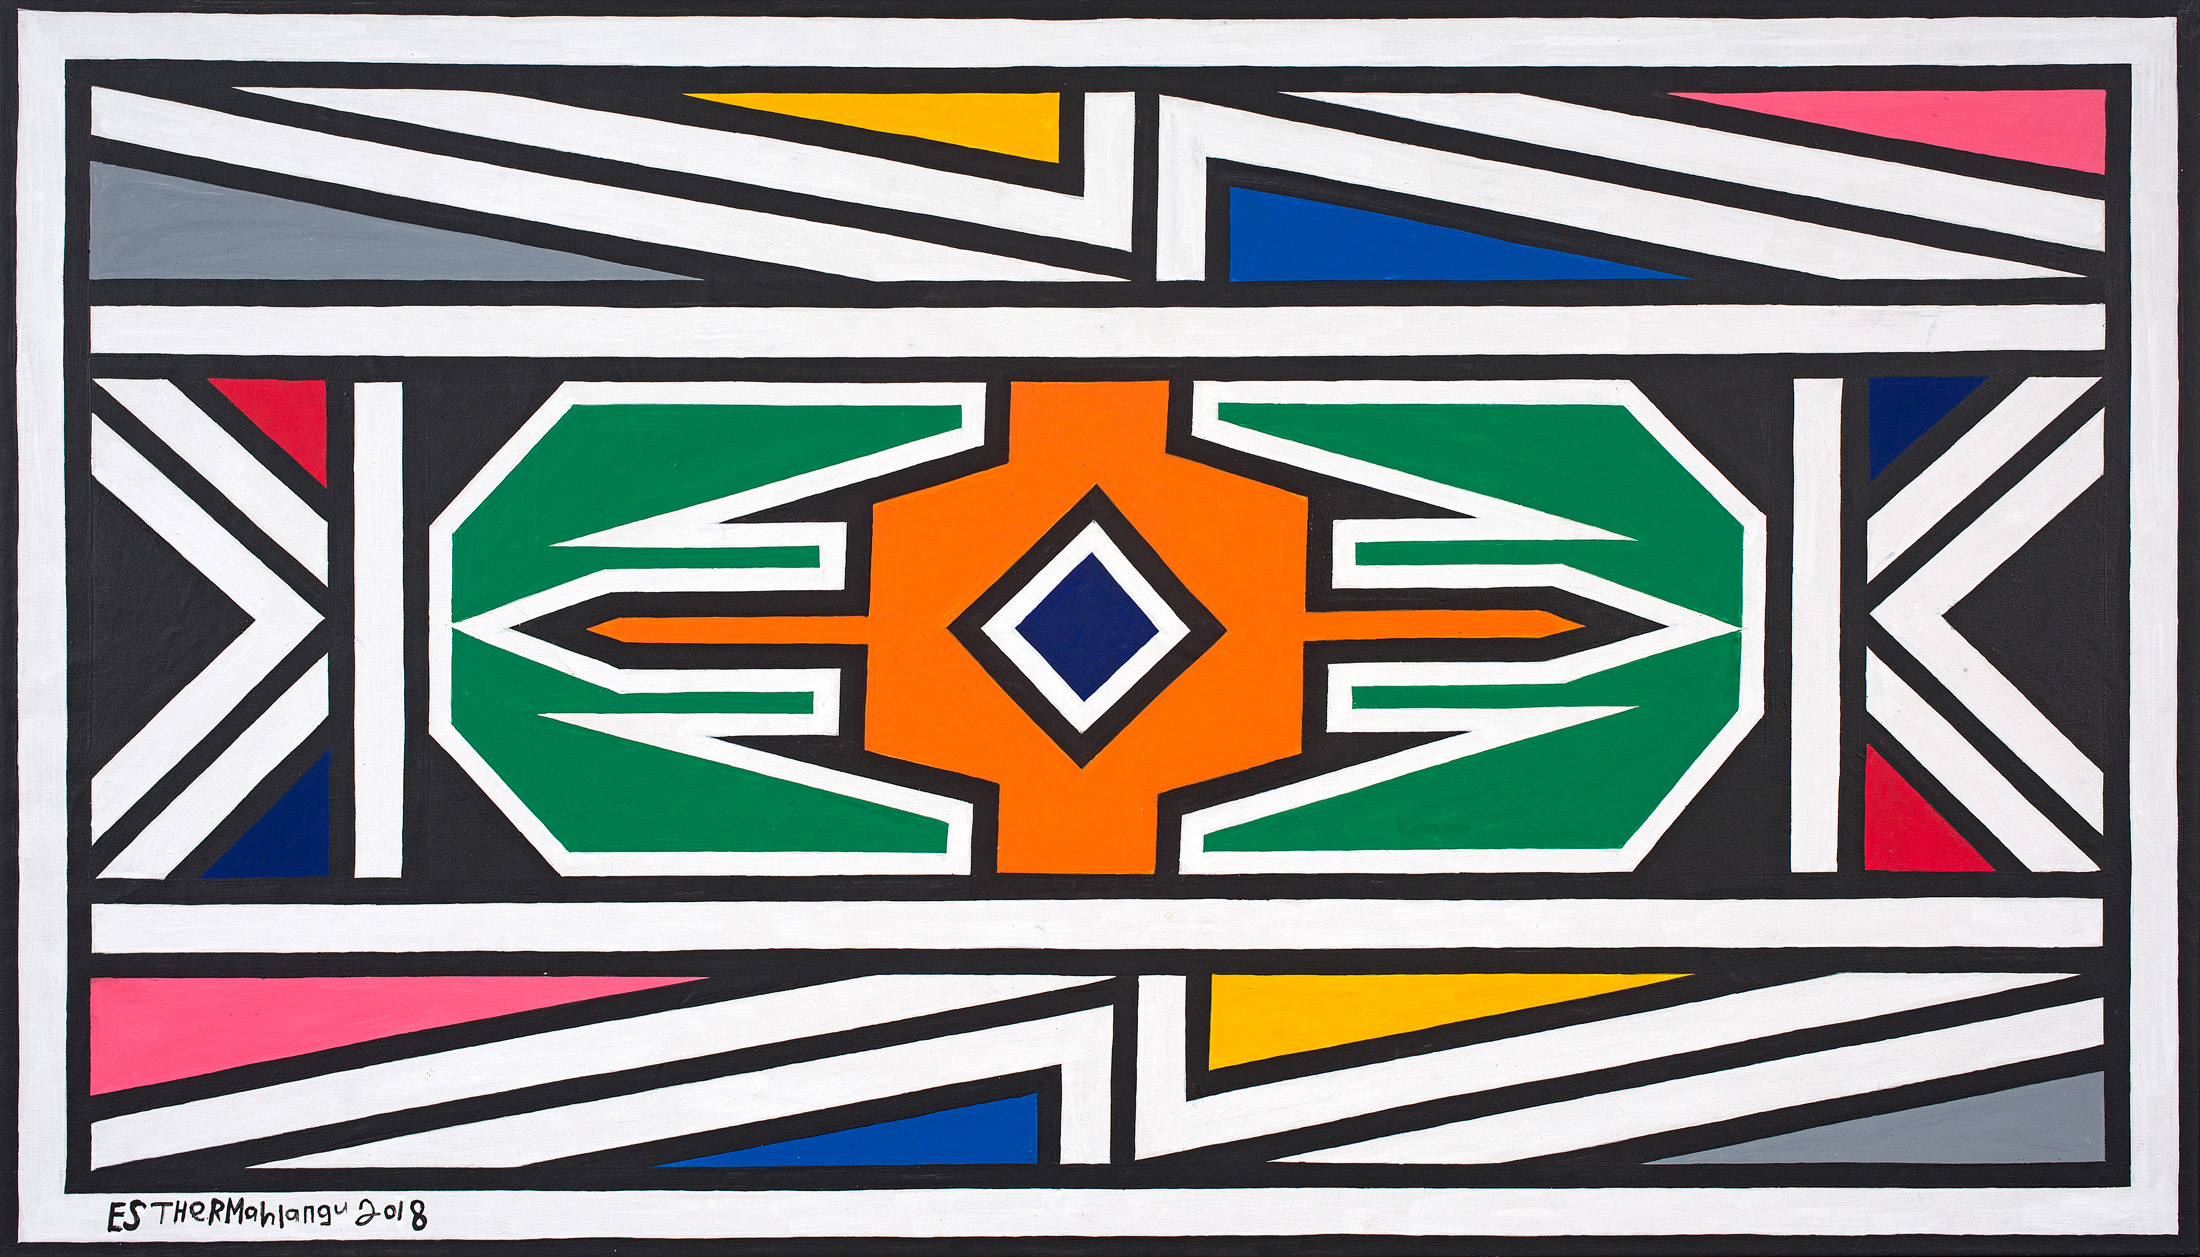 Ndebele Patterns By Esther Mahlangu Strauss And Co